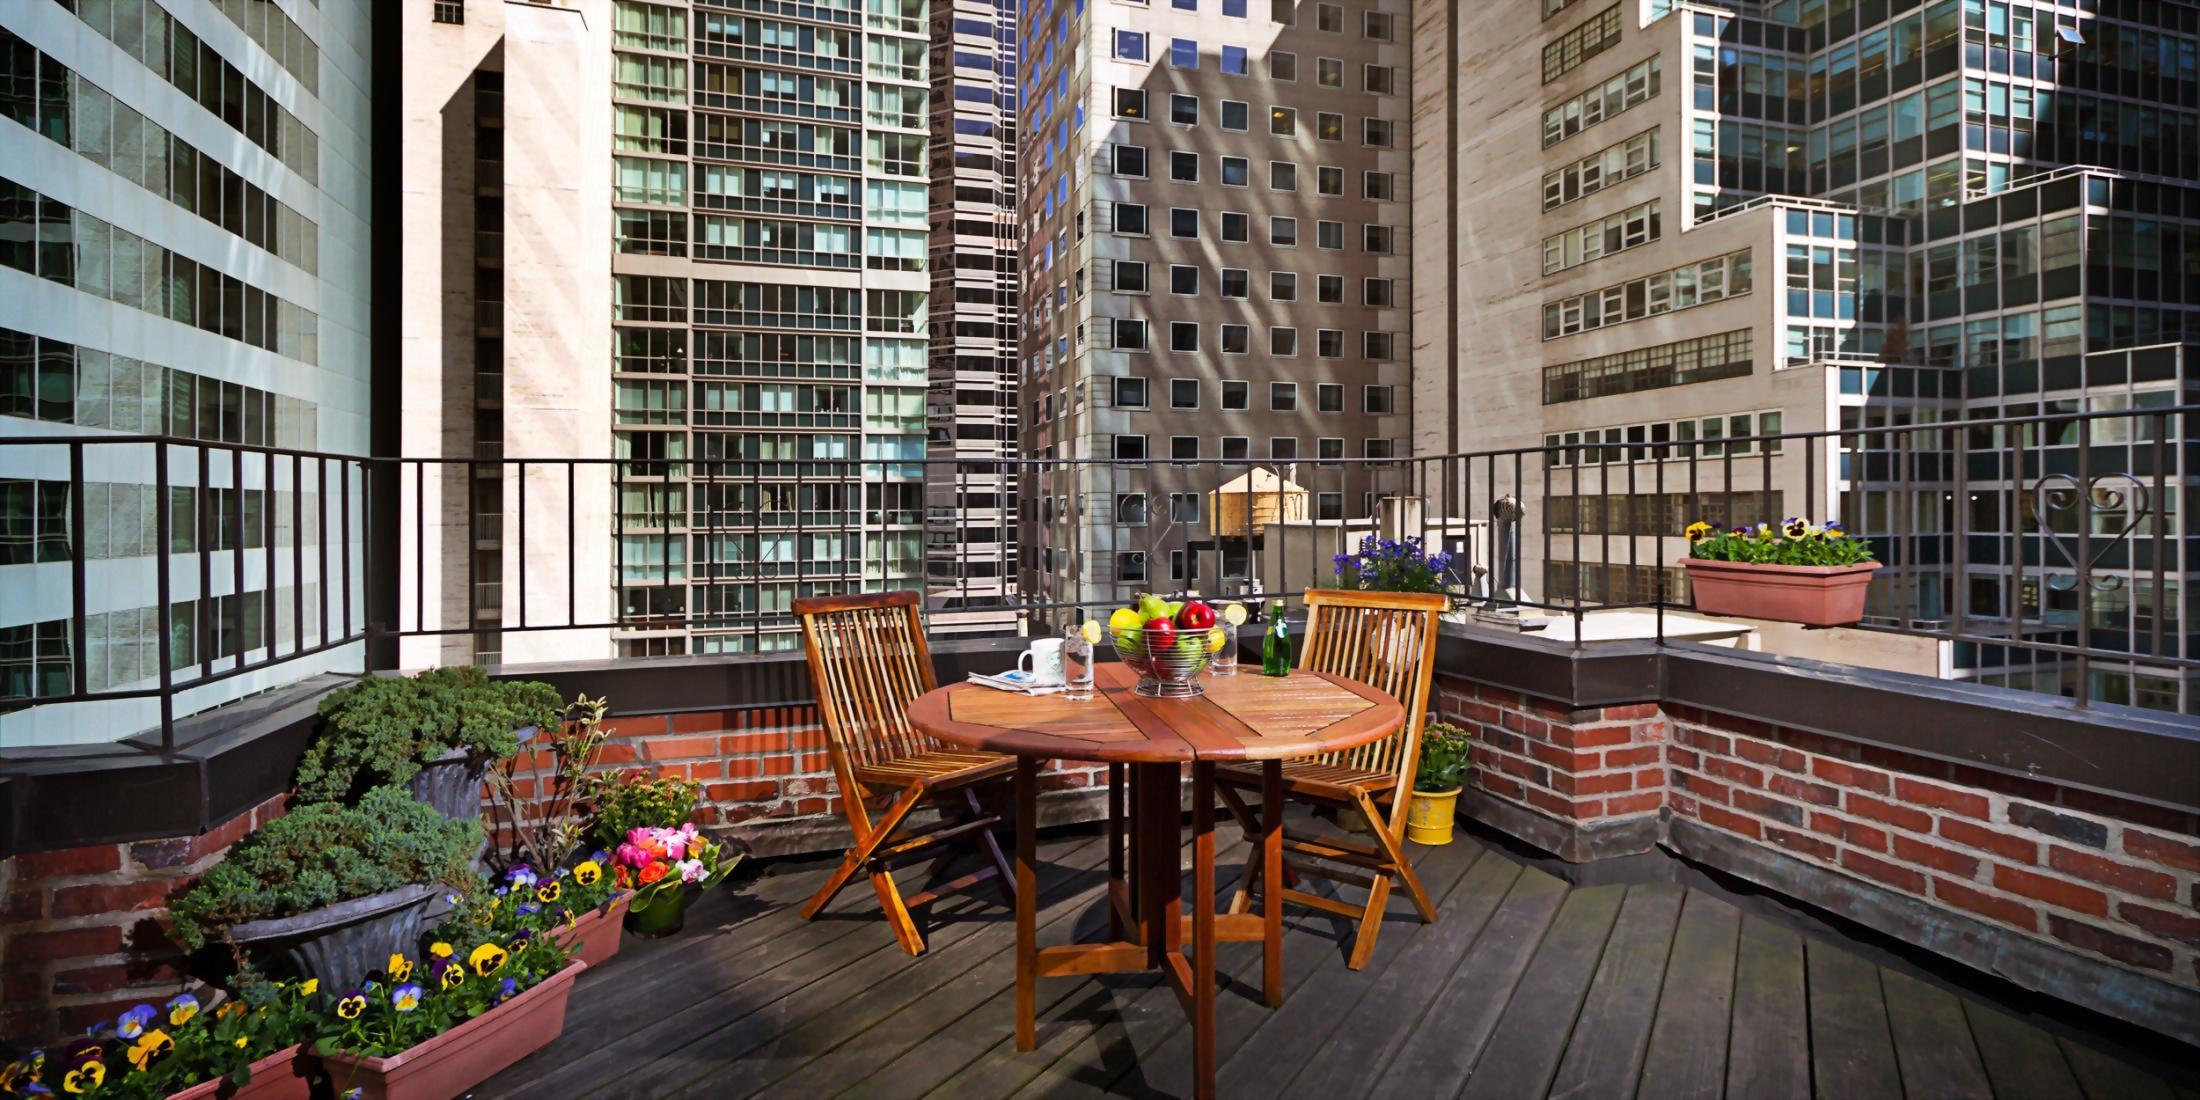 Outdoor Balcony at the Hotel Elysee in New York City.  Only 4 rooms include an out door balcony.